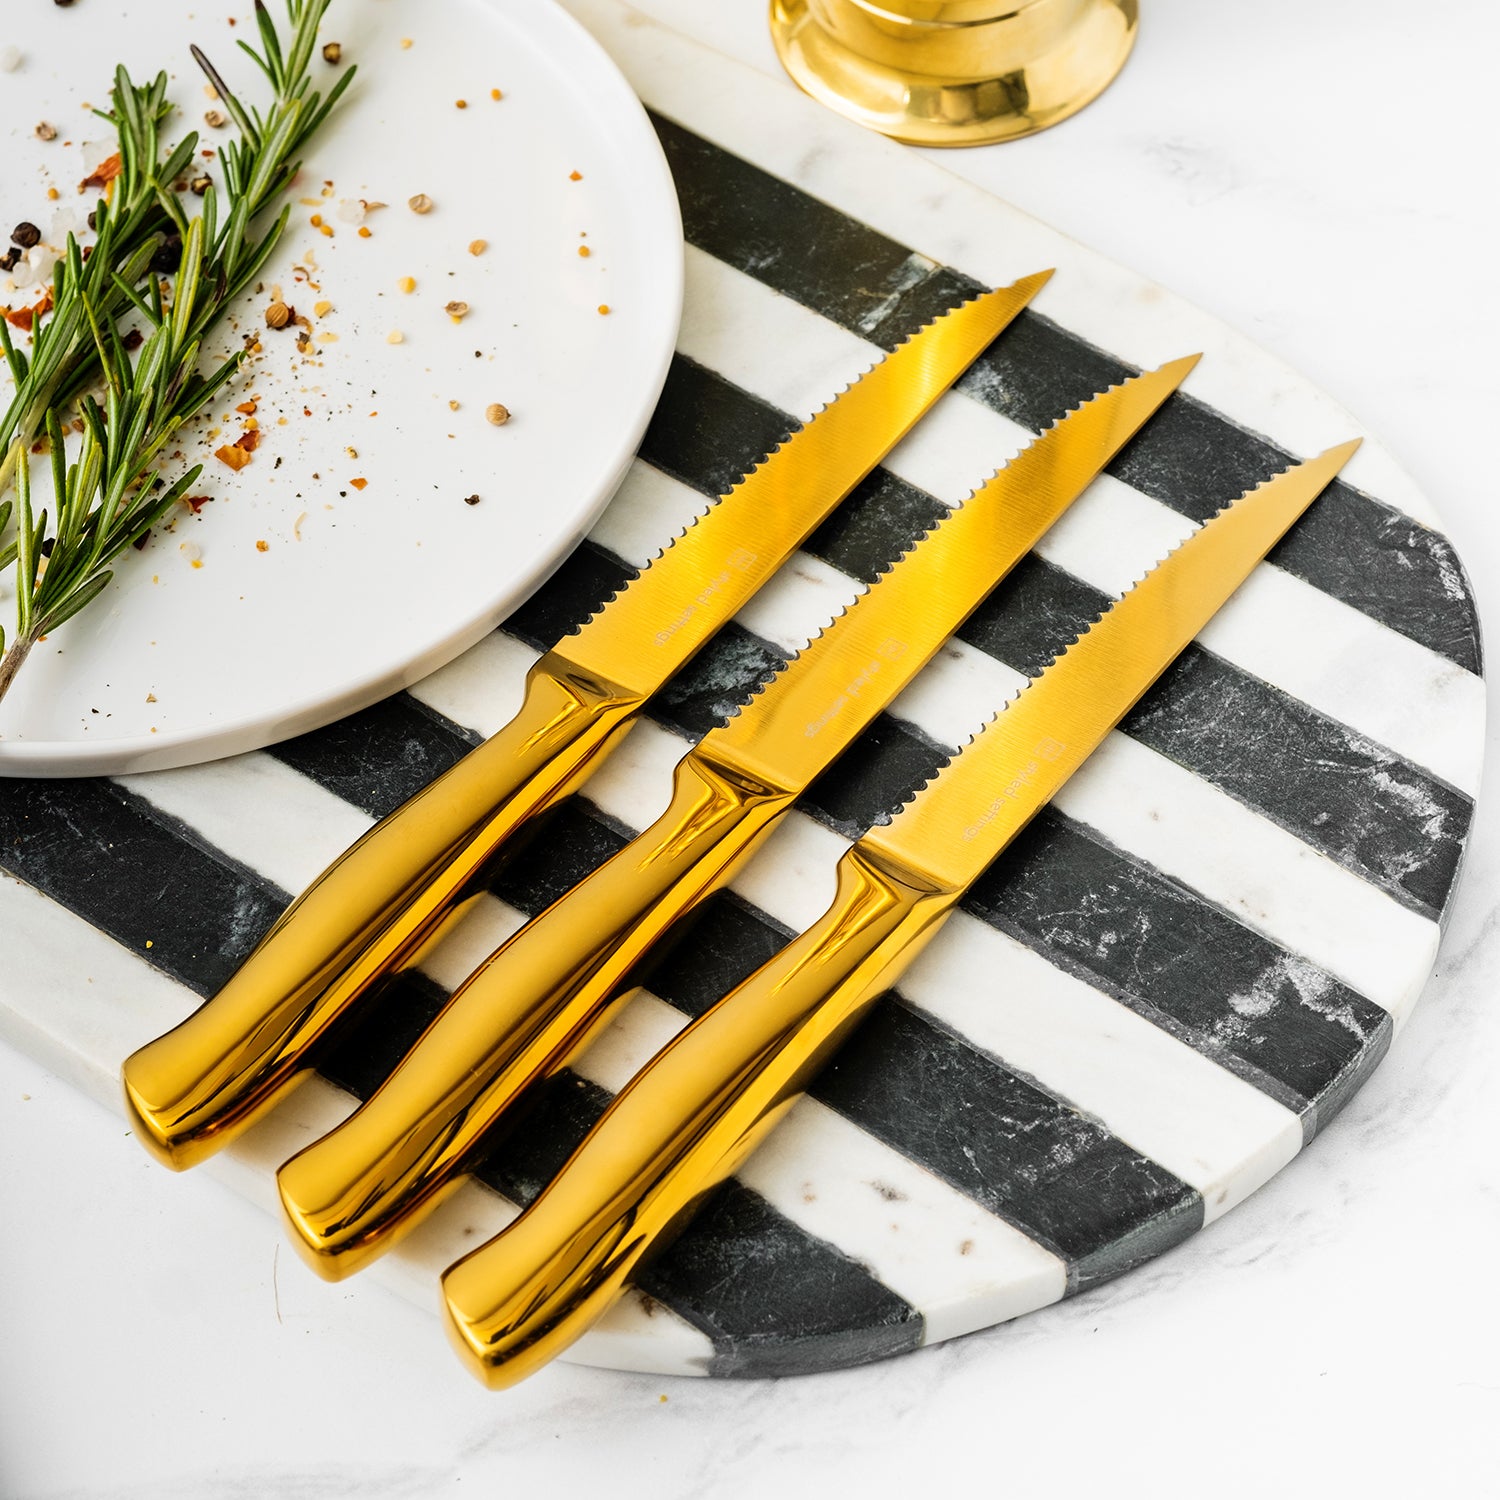 Gold Knife Set with White Self-Sharpening Block - Styled Settings